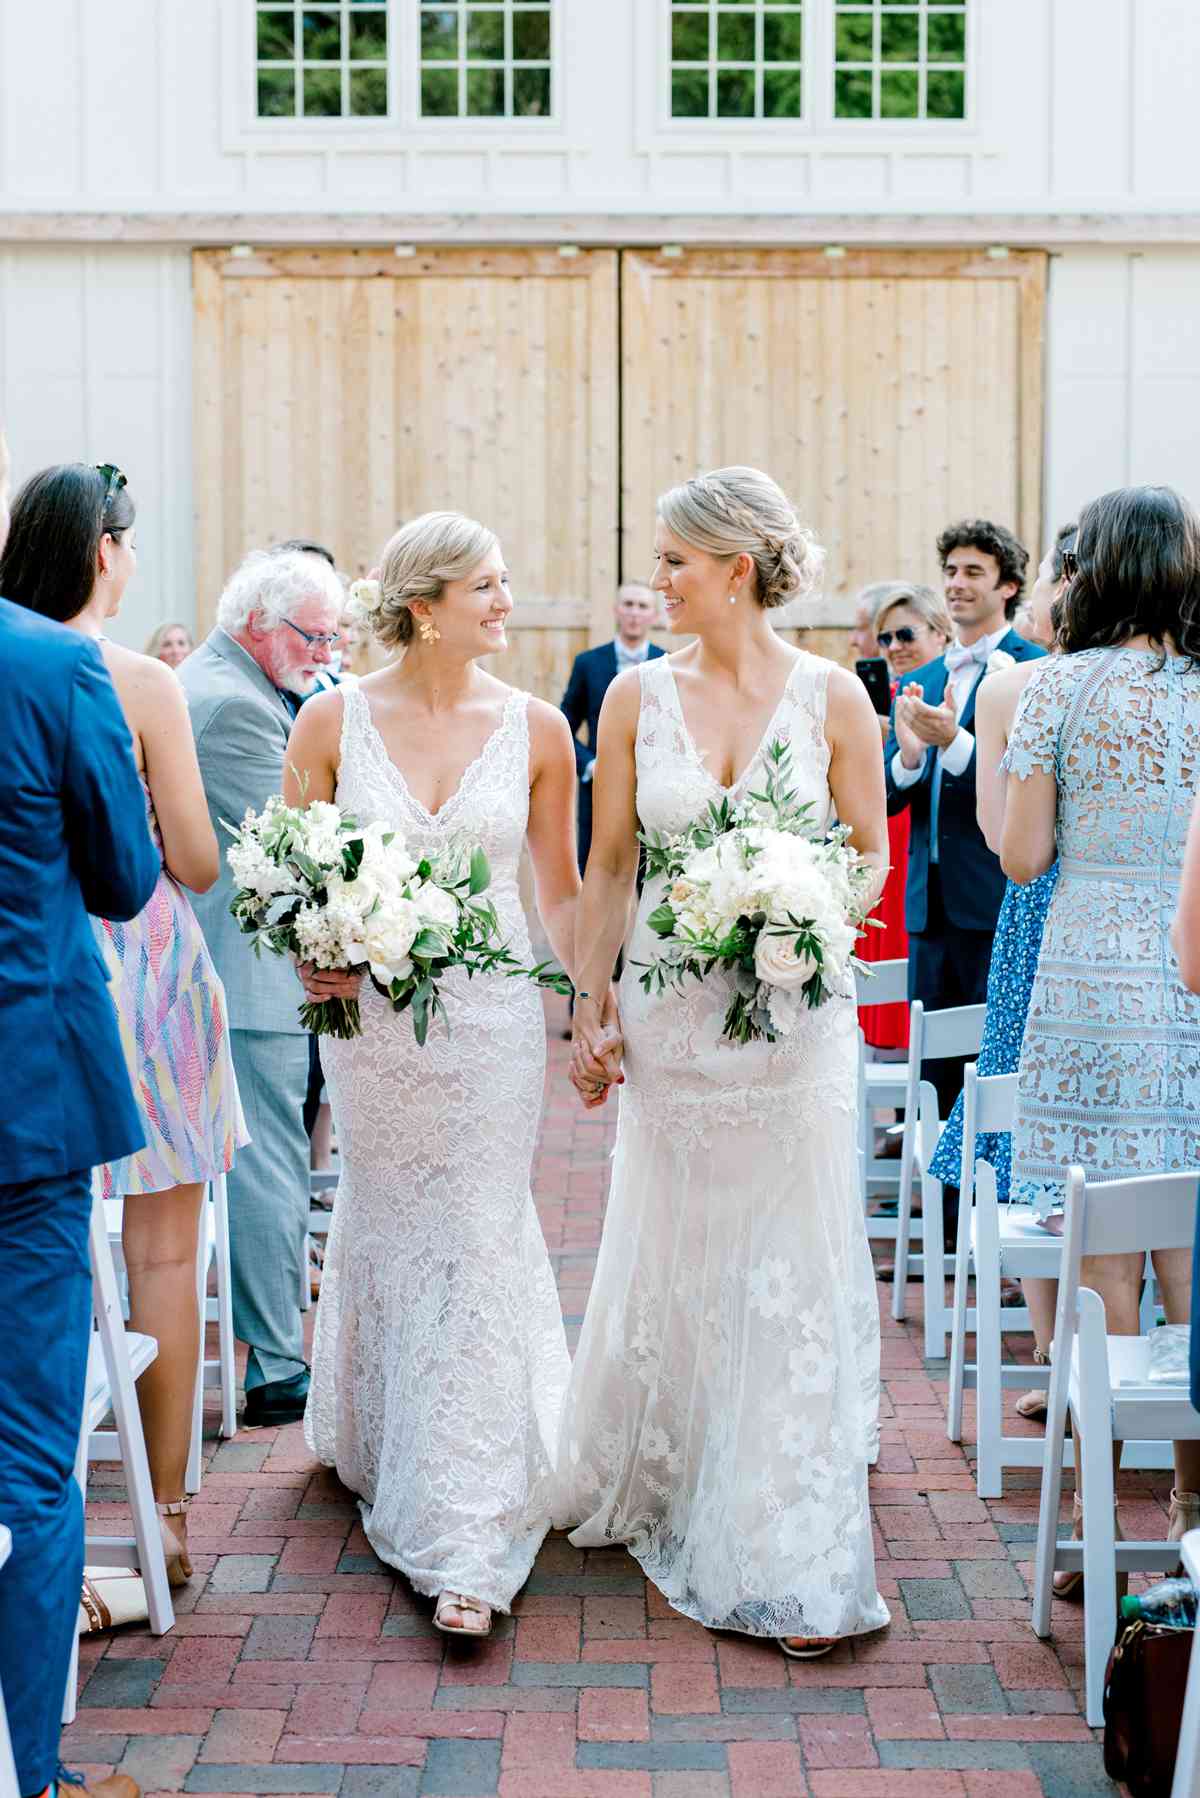 paige and kristine wedding recessional